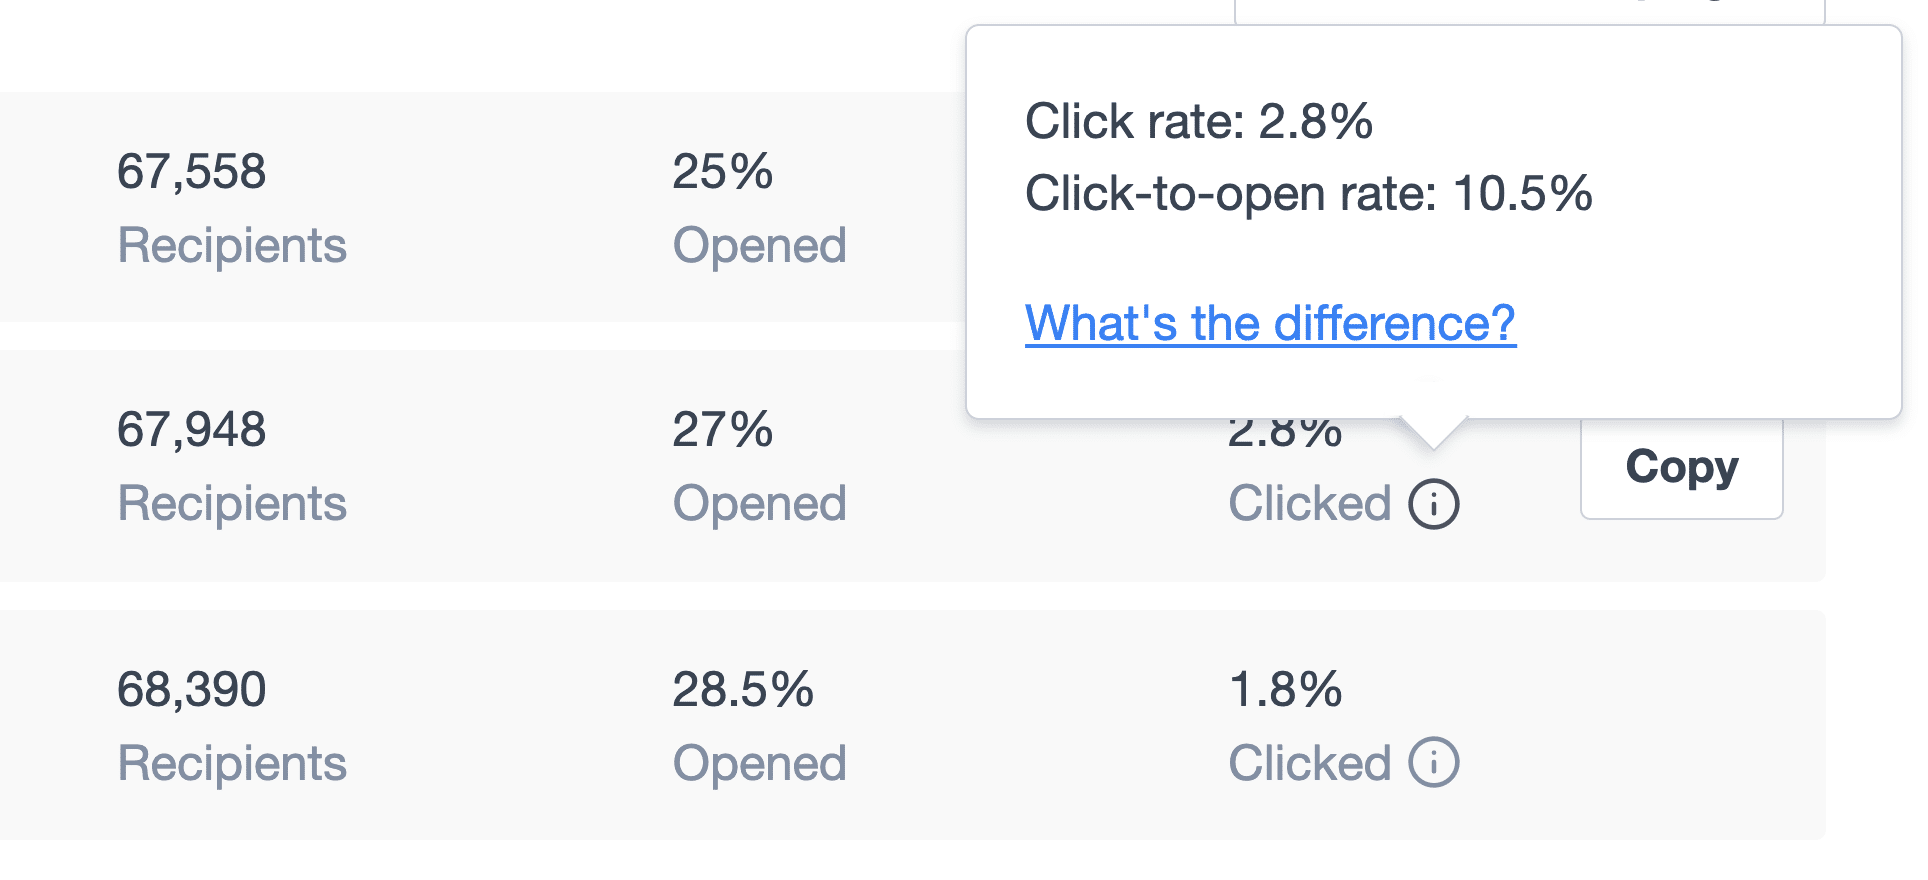 A pop-up showing click rate and click-to-open rate